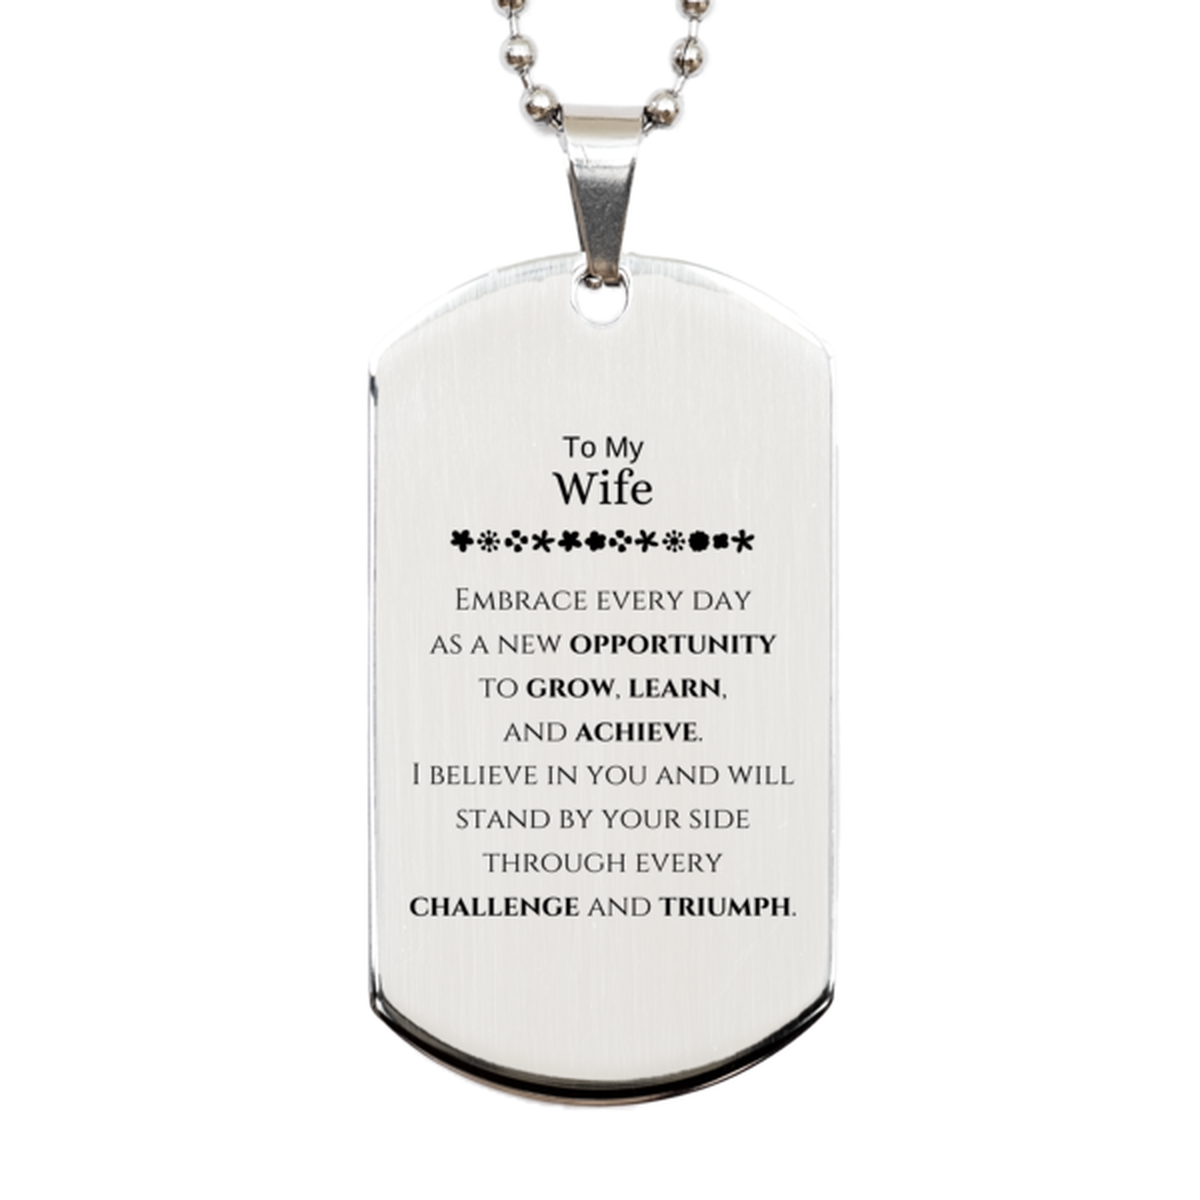 To My Wife Gifts, I believe in you and will stand by your side, Inspirational Silver Dog Tag For Wife, Birthday Christmas Motivational Wife Gifts